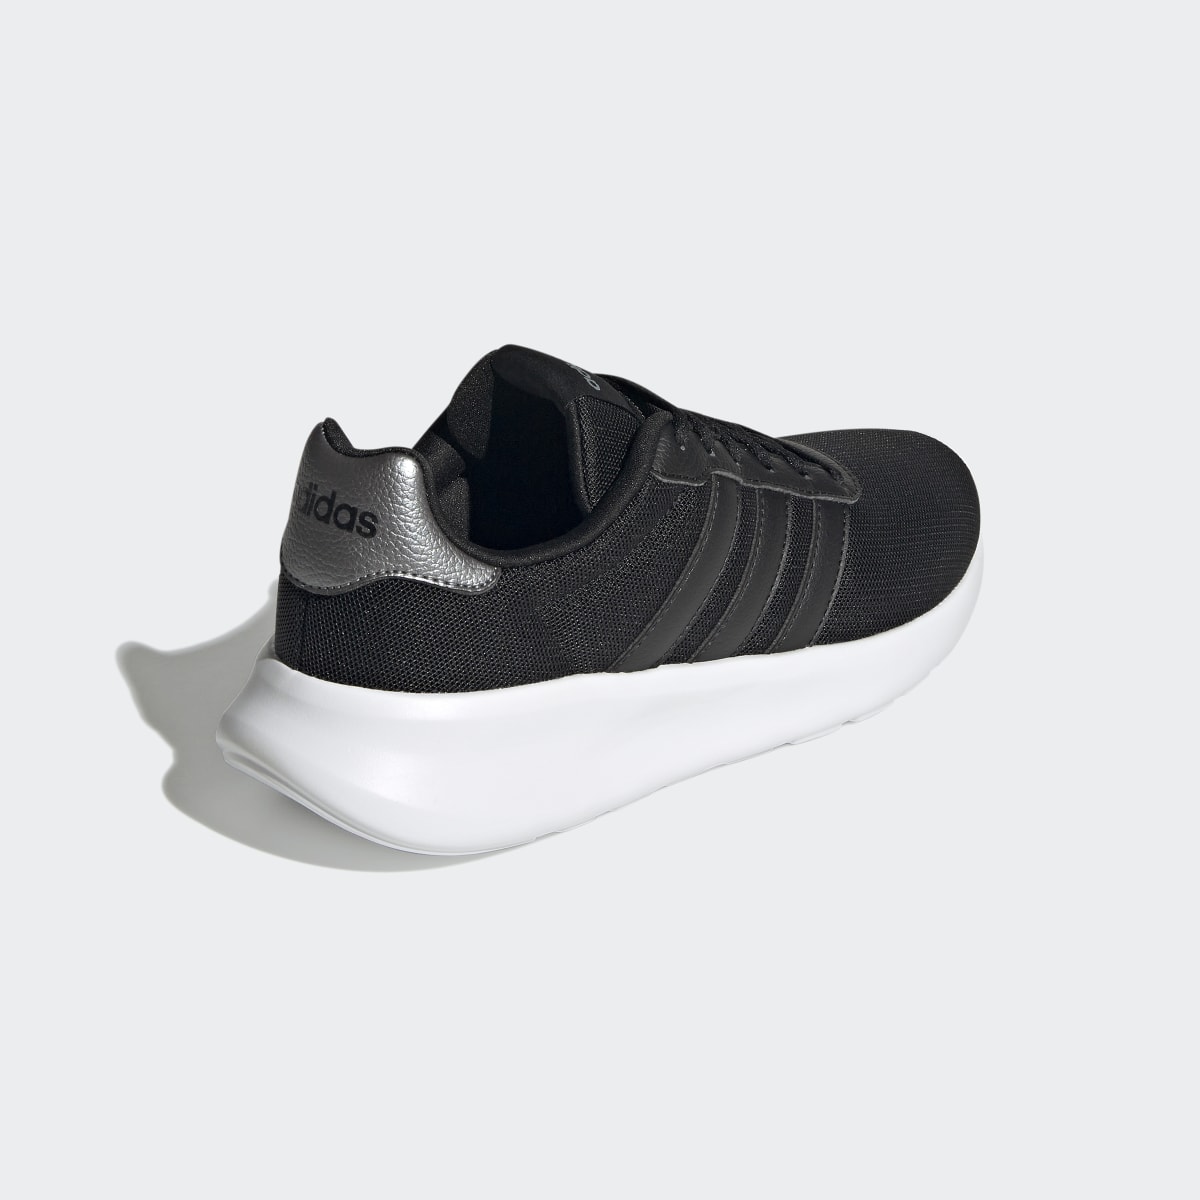 Adidas Lite Racer 3.0 Shoes. 6